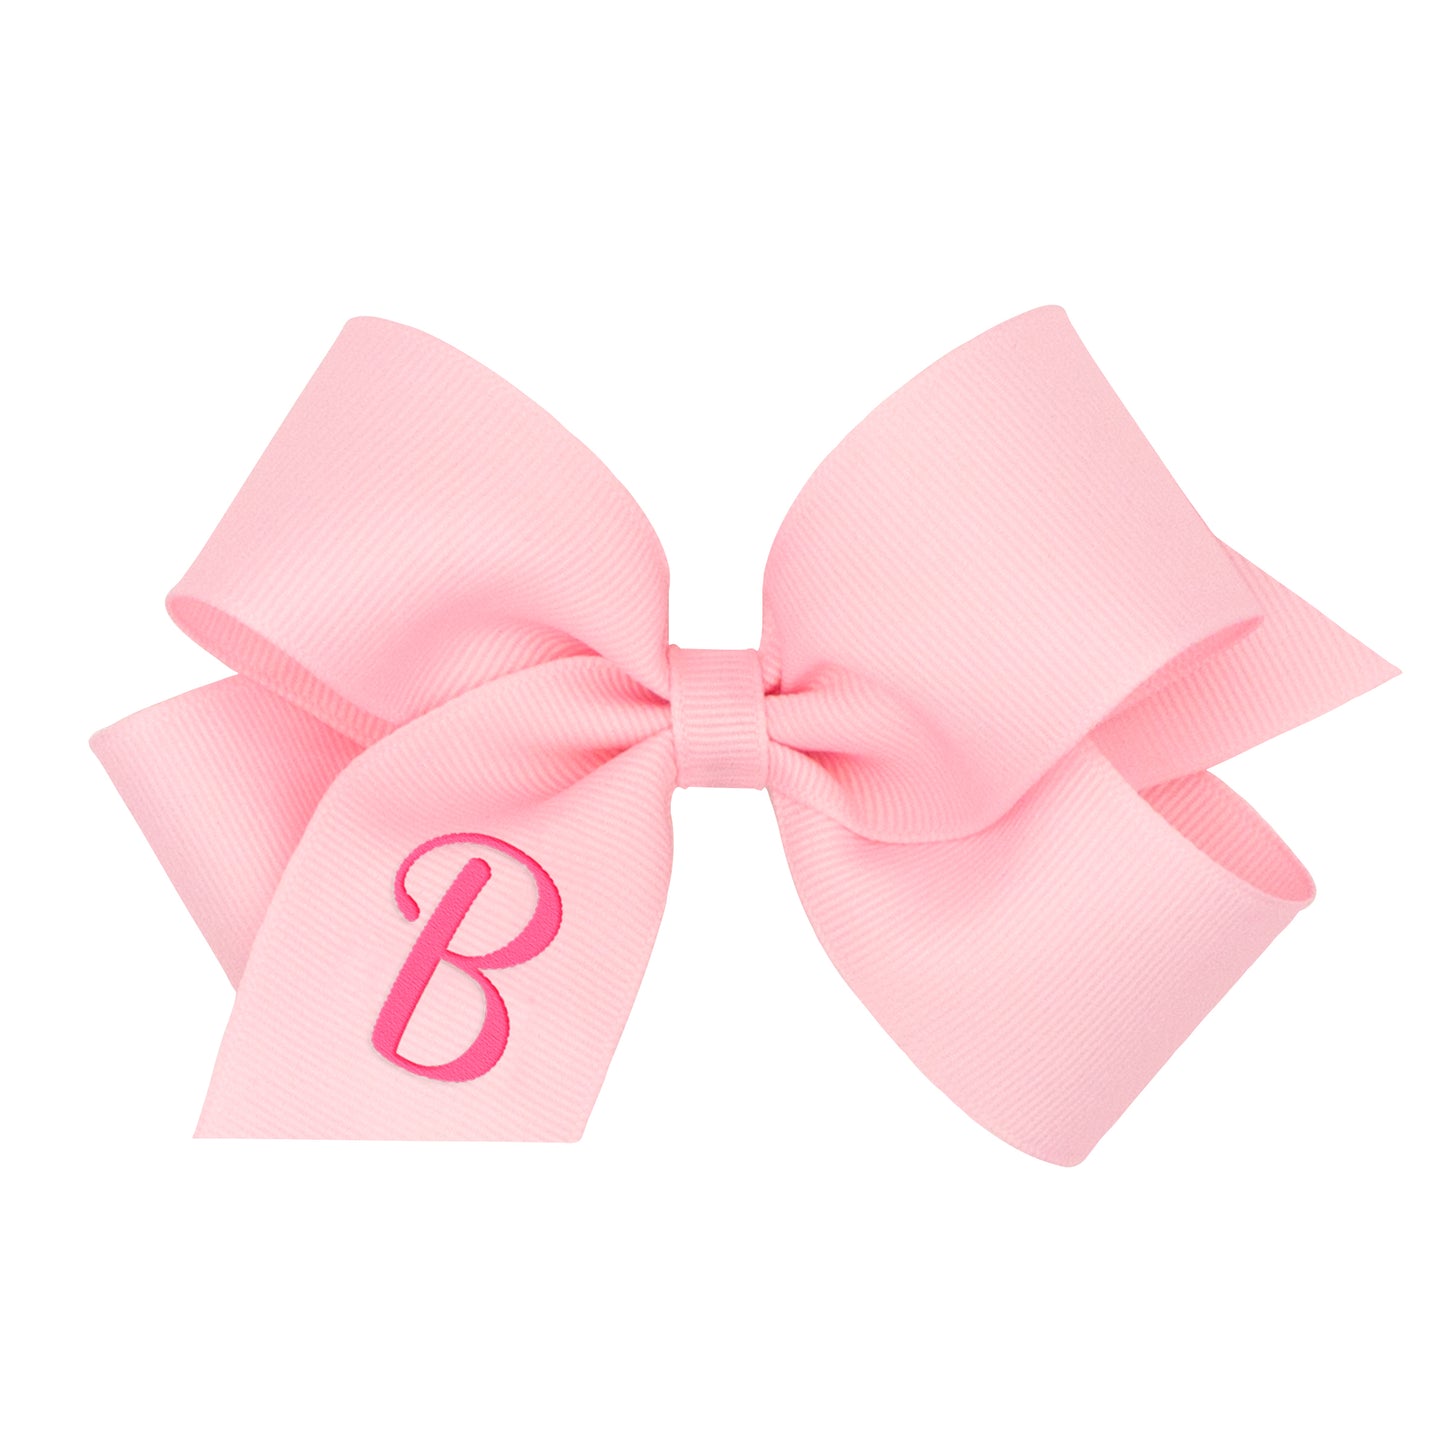 Medium Monogrammed Grosgrain Hair Bow - Light Pink with Hot Pink Initial